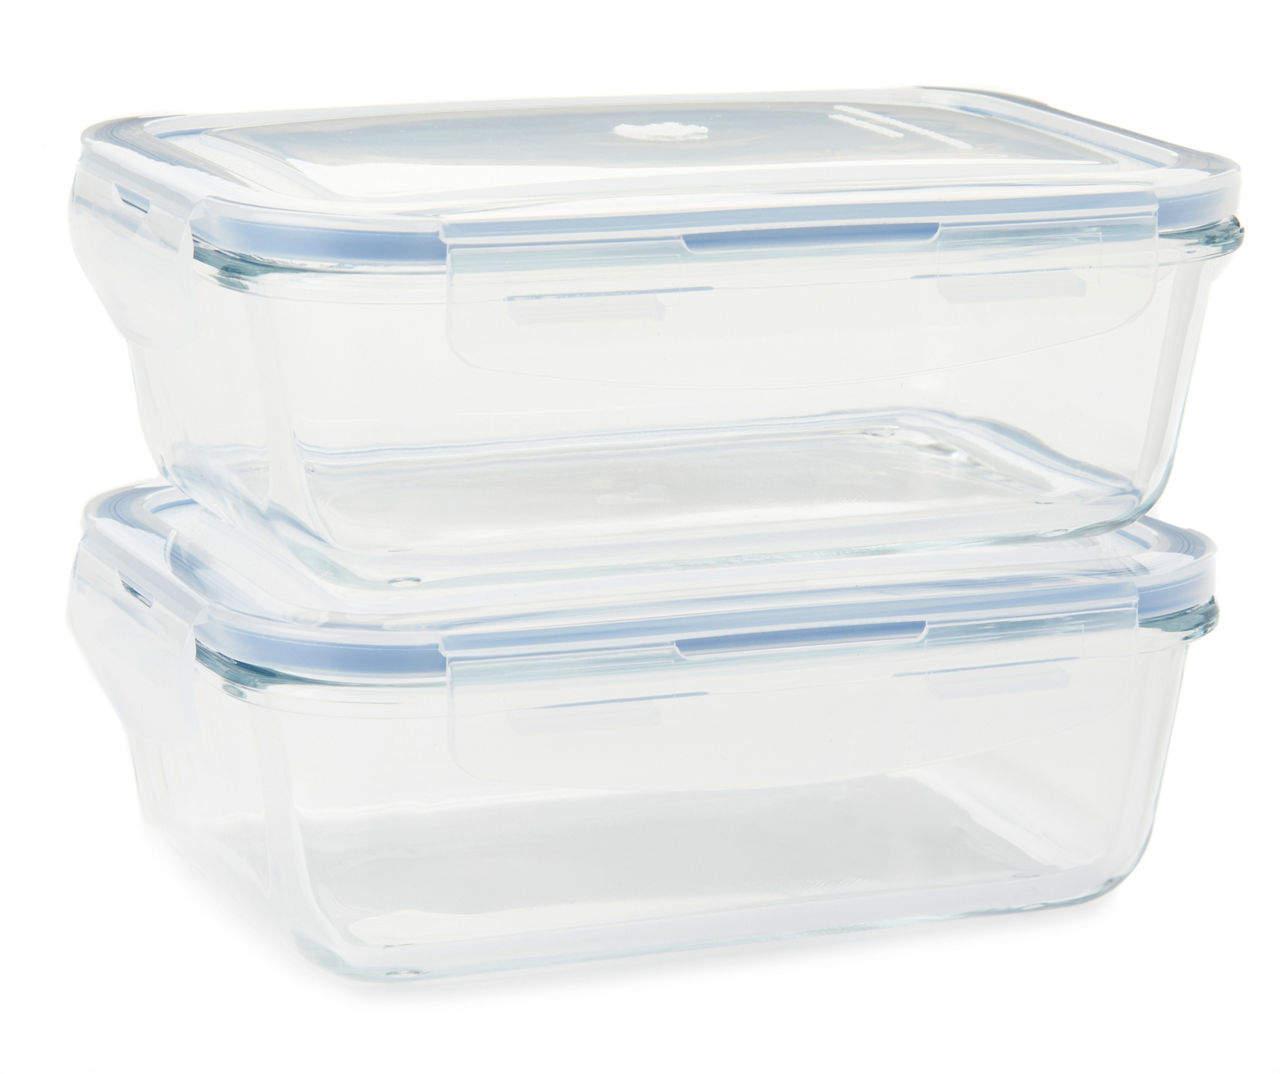 Circleware Snap Lid Containers, 2-Pack